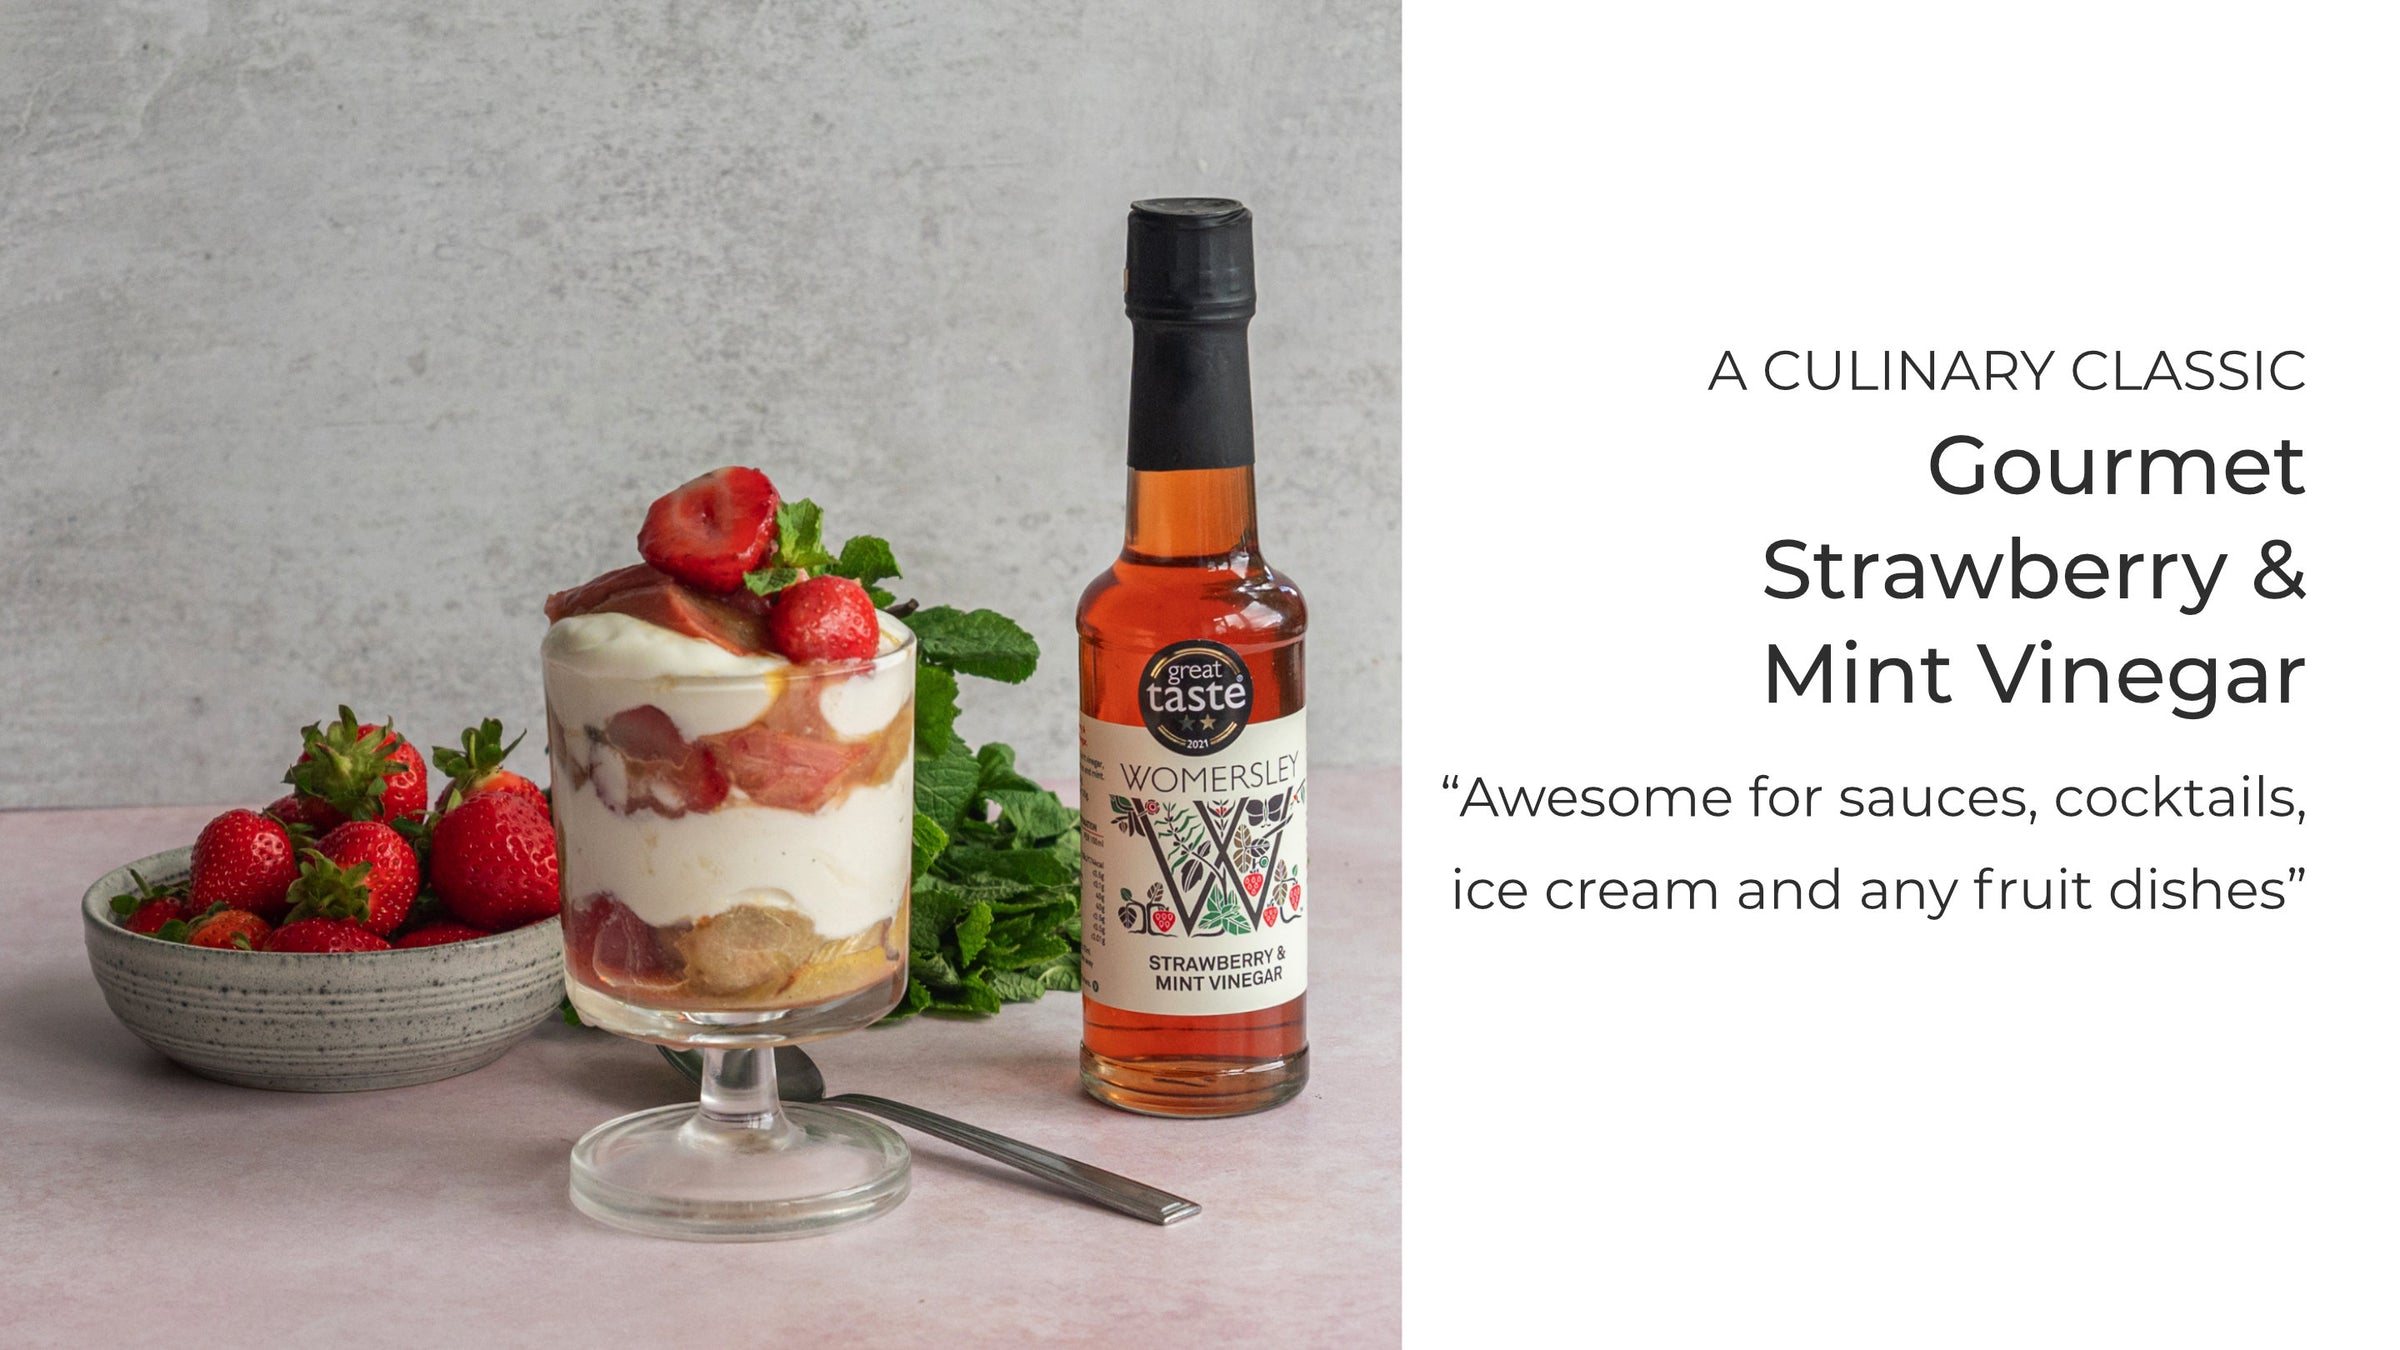 A culinary classic, Gourmet Strawberry & Mint Vinegar. Awesome for sauces, cocktails, ice cream and any fruit dishes.